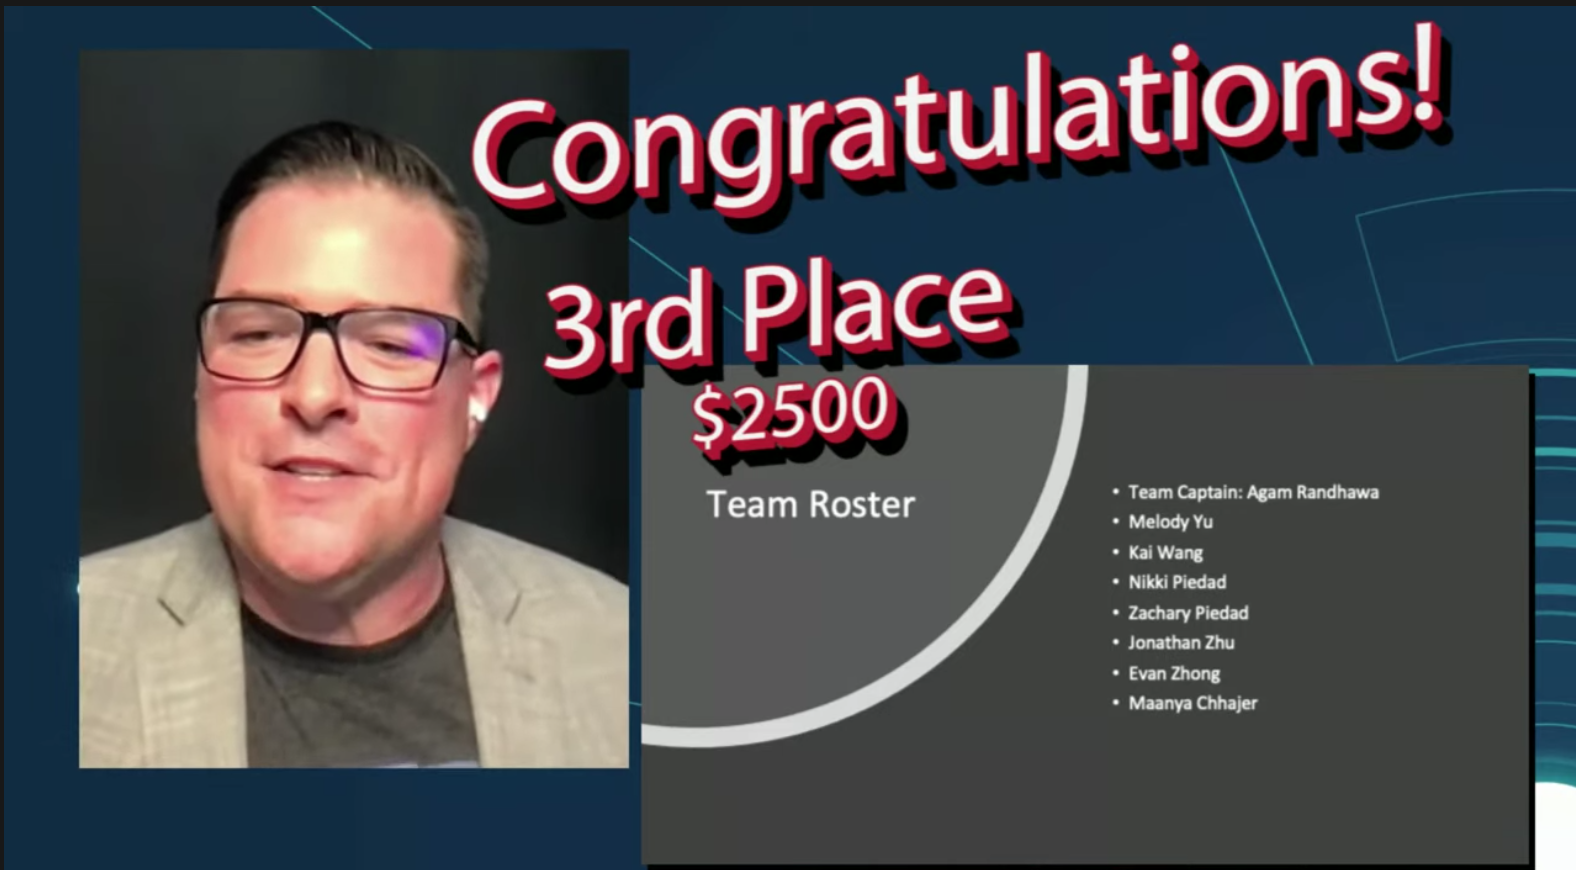 $2500 and 3rd Place in 2021 CyberCup Finals